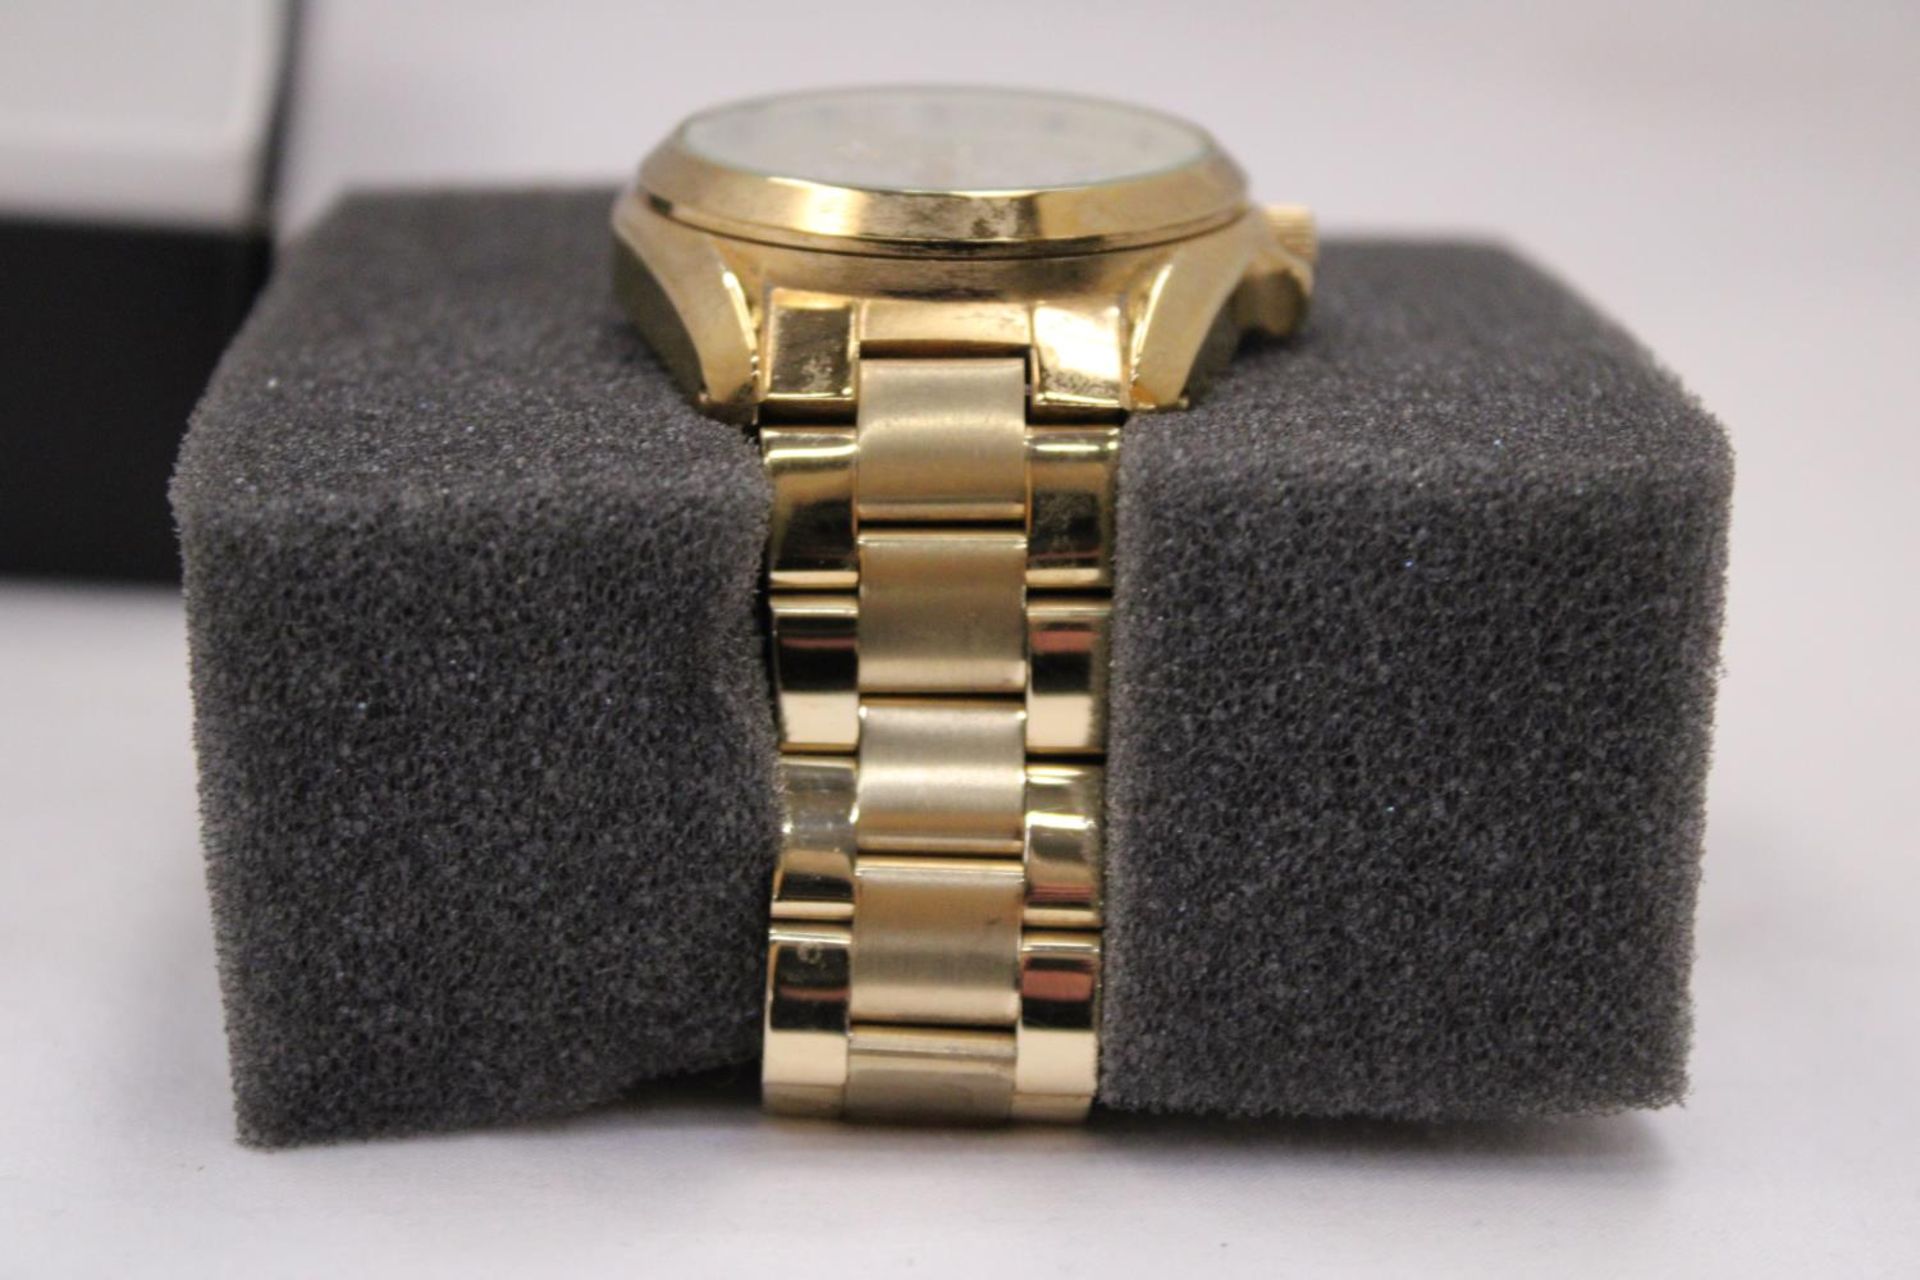 A MICHAEL KORS STYLE GOLD COLOURED WATCH IN PRESENTATION BOX - Image 3 of 5